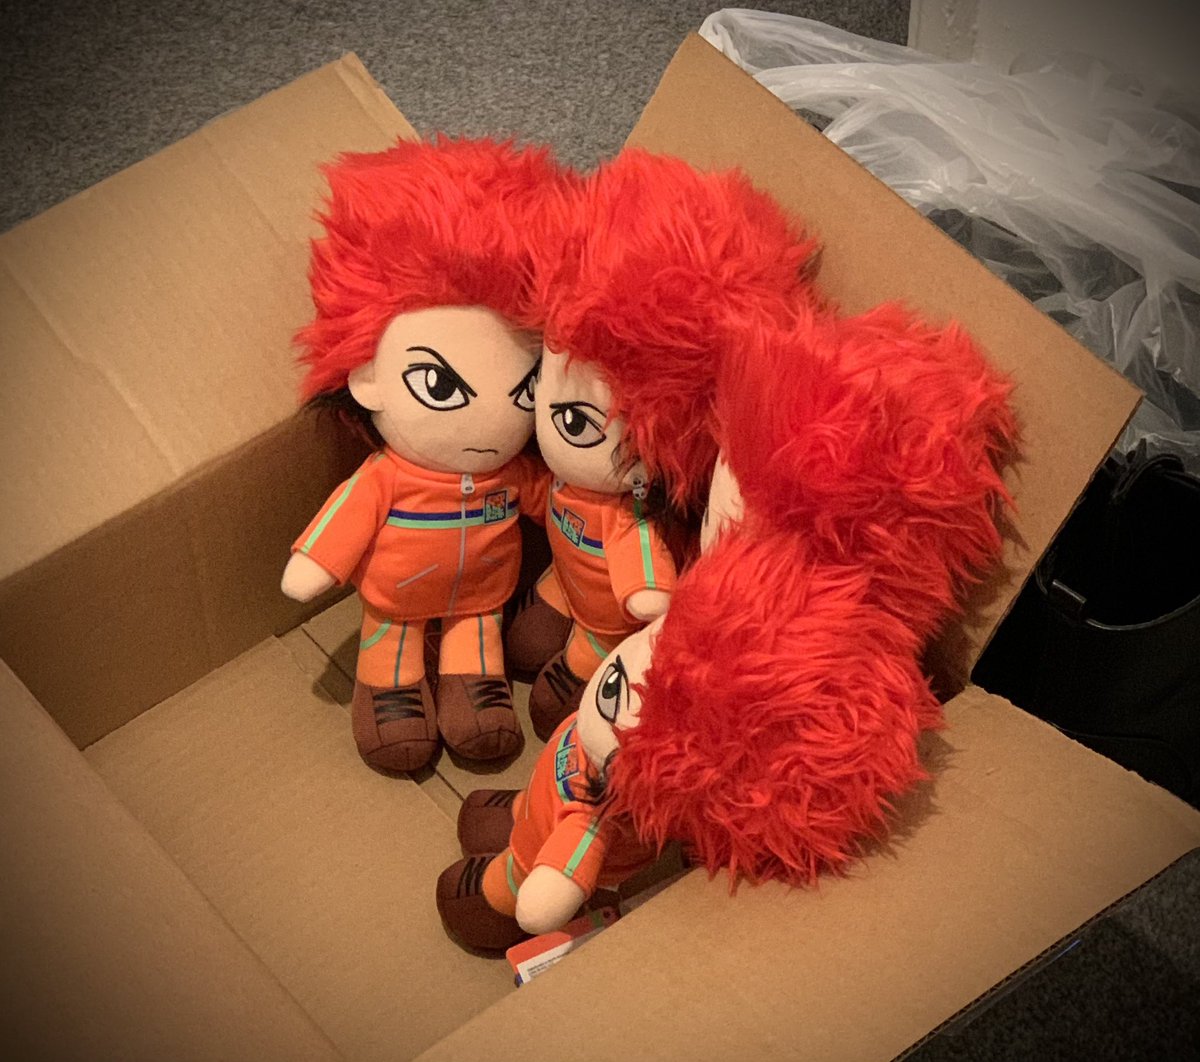 Throwback to one of the best deliveries I've ever had! 💗(The other best deliveries also being hide, of course!) 

#hide 
#hidetomatsumoto
#xjapan
#hidexjapan
#松本秀人
#hidedoll
#hideplush
#hideplushie